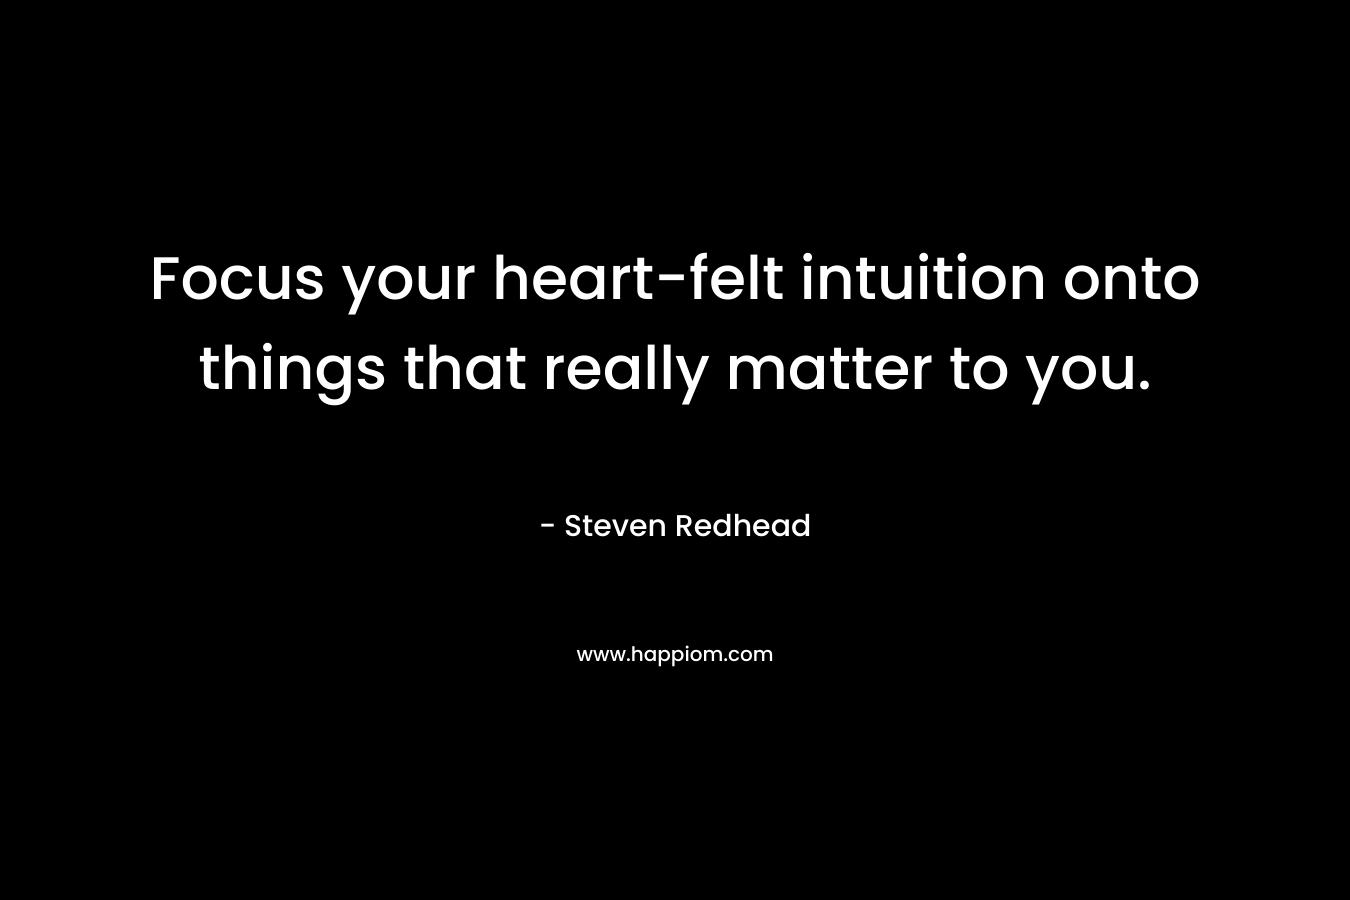 Focus your heart-felt intuition onto things that really matter to you. – Steven Redhead